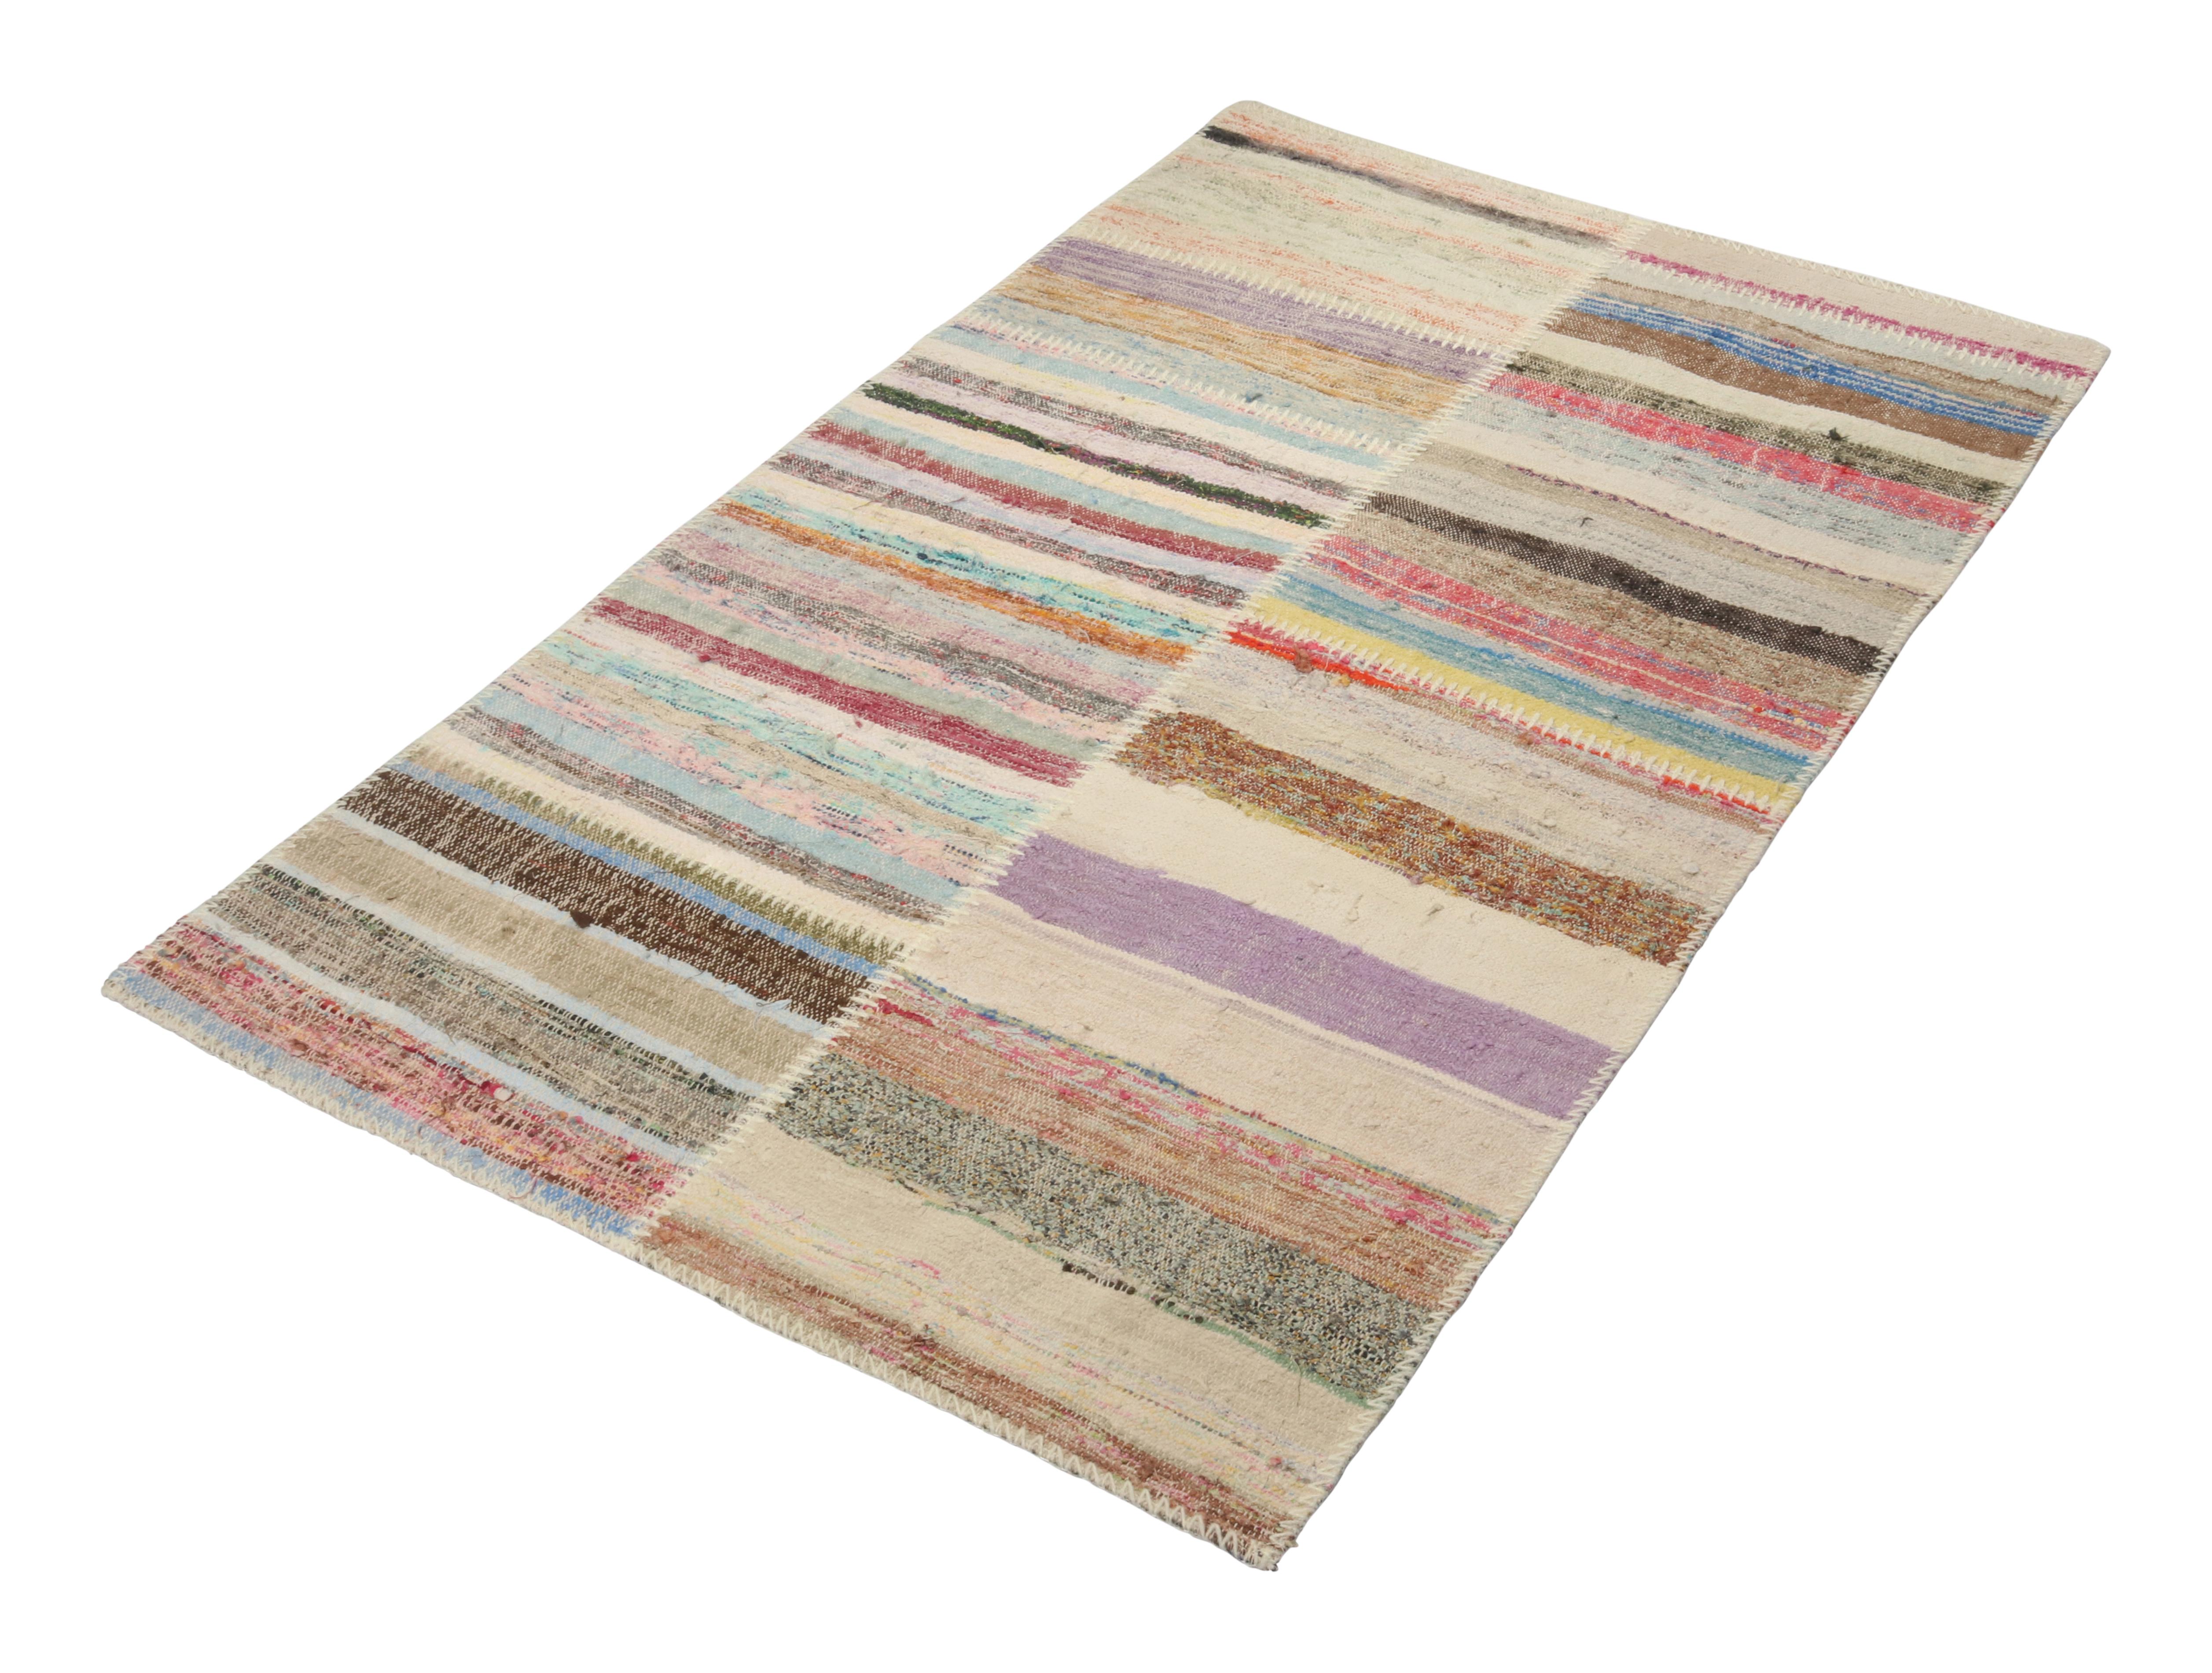 Handwoven in wool, Rug & Kilim presents a 3x5 contemporary rug from their innovative new patchwork kilim collection. 

On the Design: 

This flat weave technique repurposes vintage yarns in polychromatic stripes and striae, achieving a playful